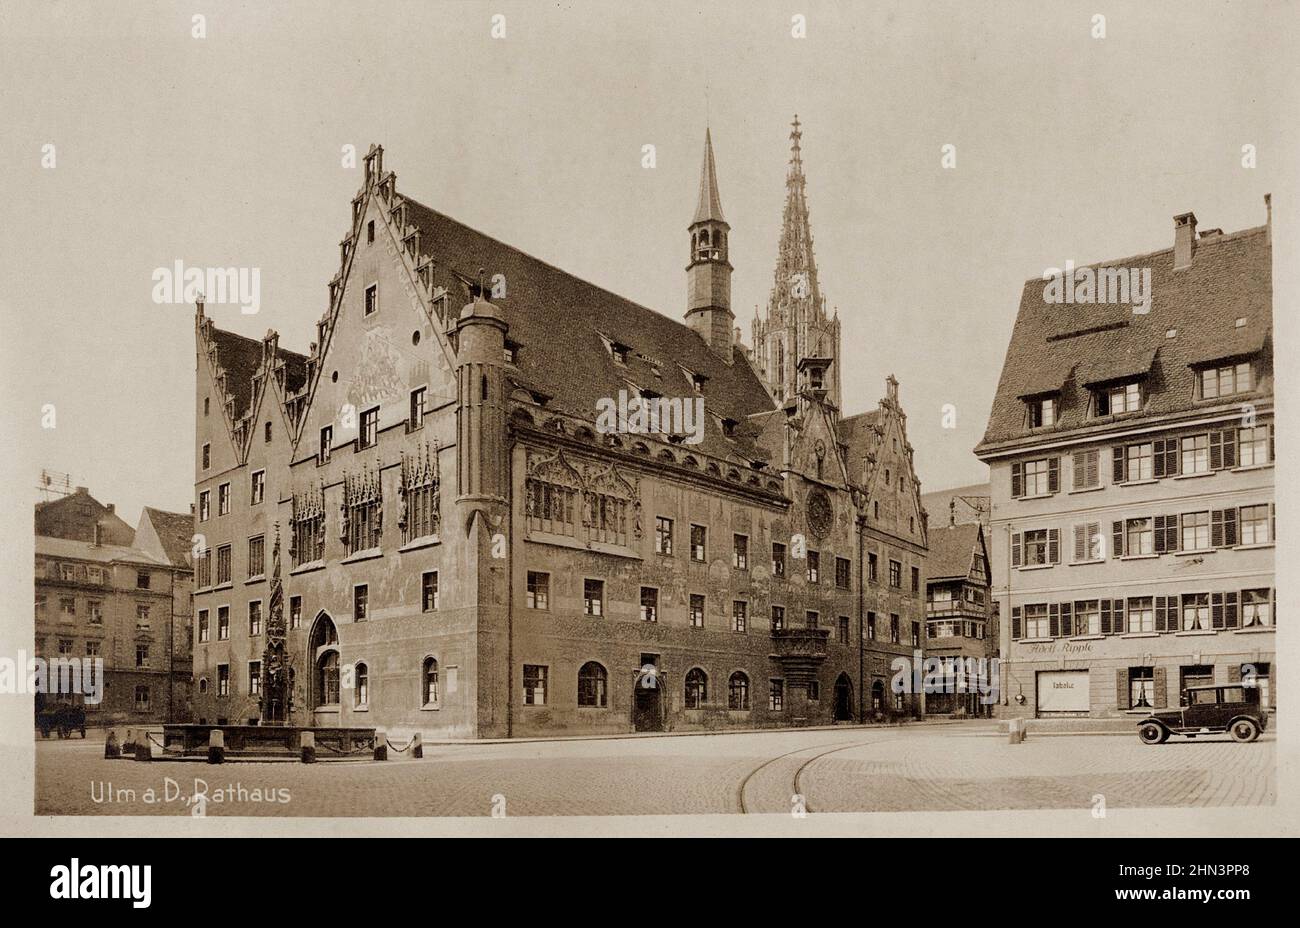 Vintage photo of Ulm, Rathaus. Germany. 1920s A city in the German state of Baden-Württemberg, situated on the river Danube Stock Photo